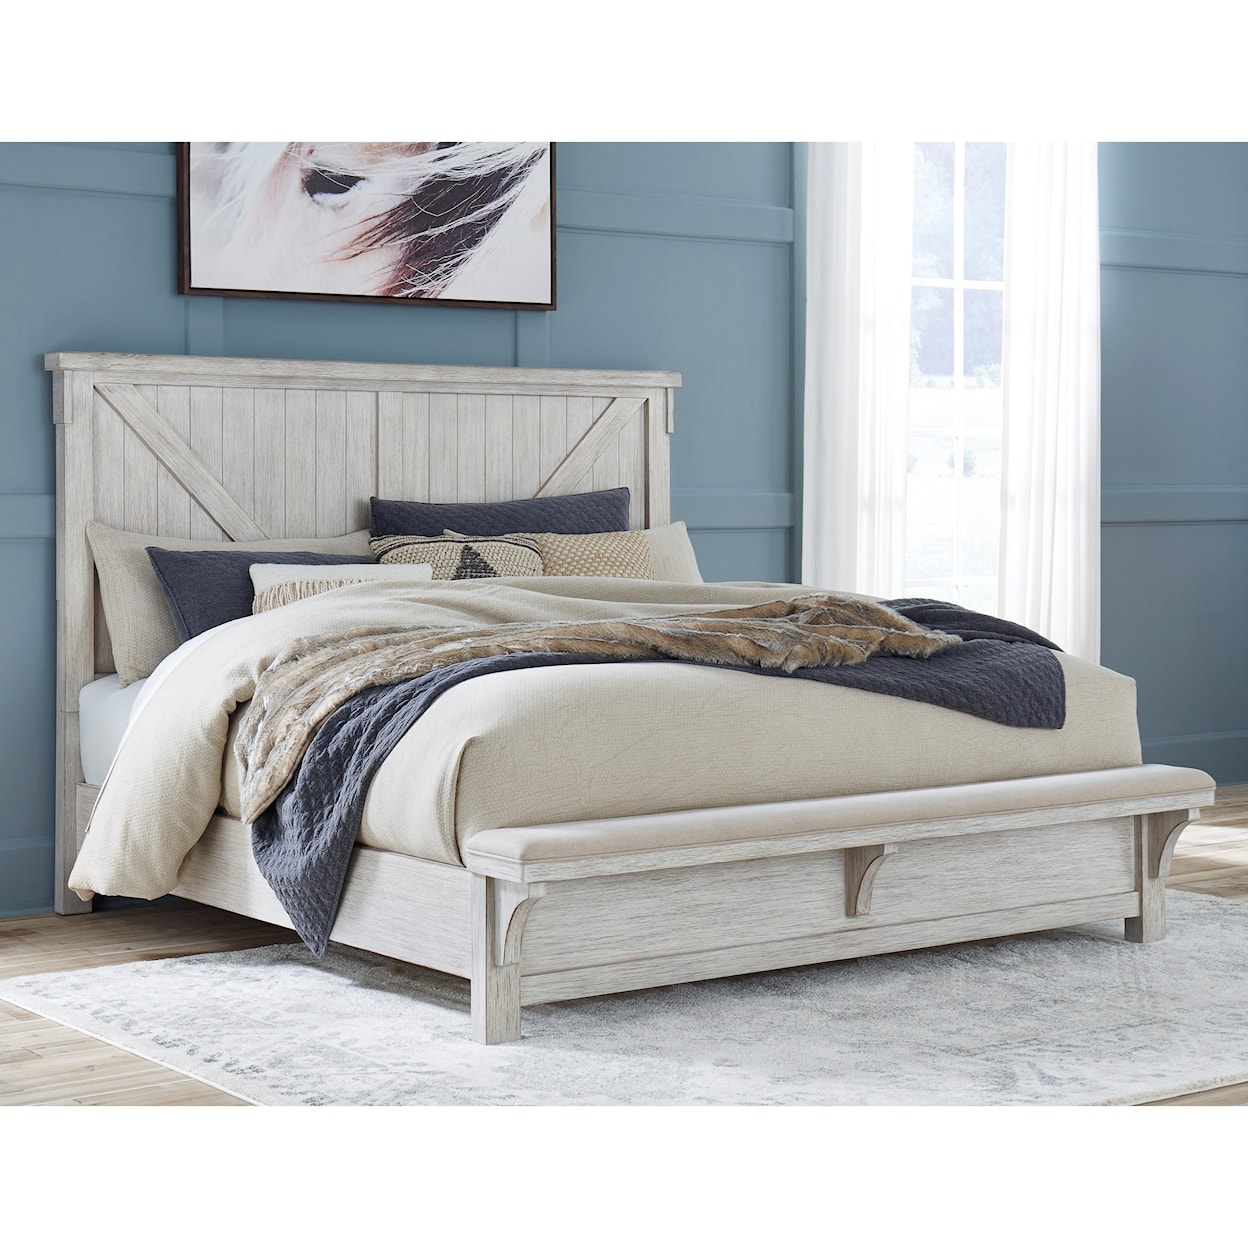 Signature Design by Ashley Brashland Queen Bed with Footboard Bench